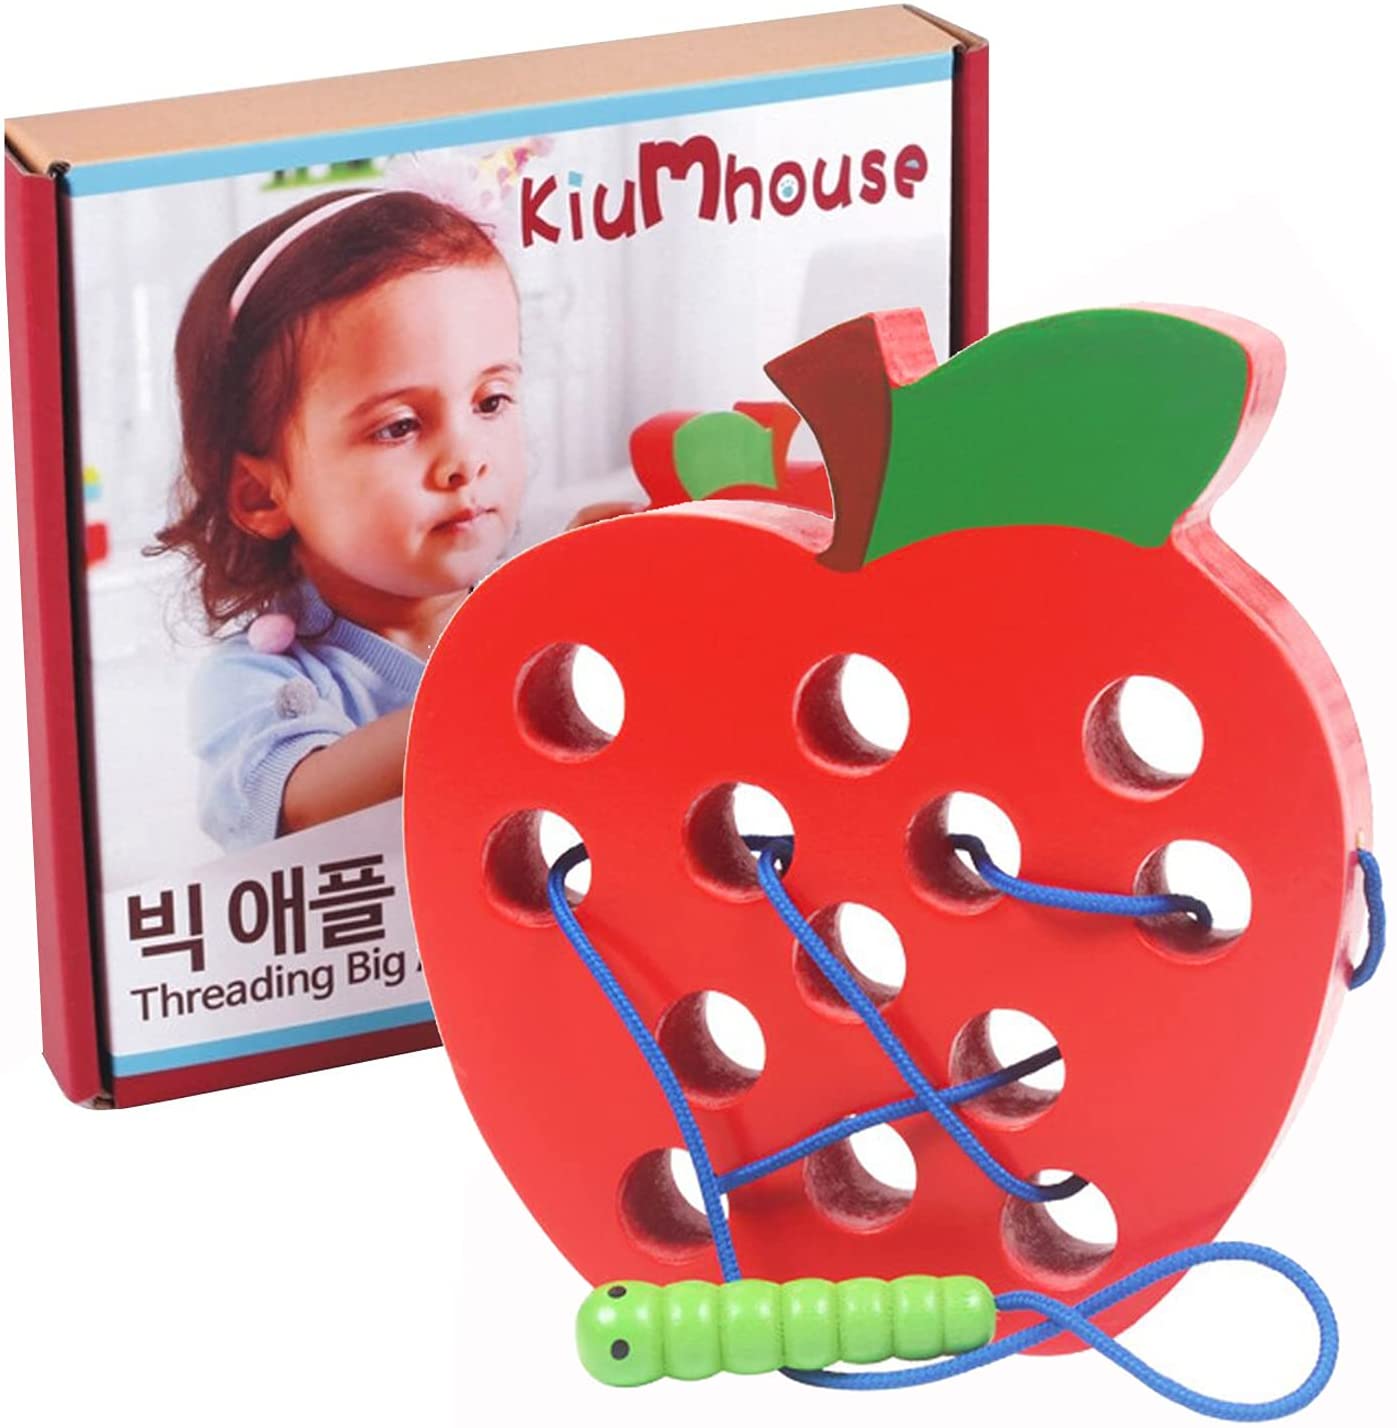 Wooden Red Apple Montessori Learning Toy for Toddlers Kids Birthday Gift 